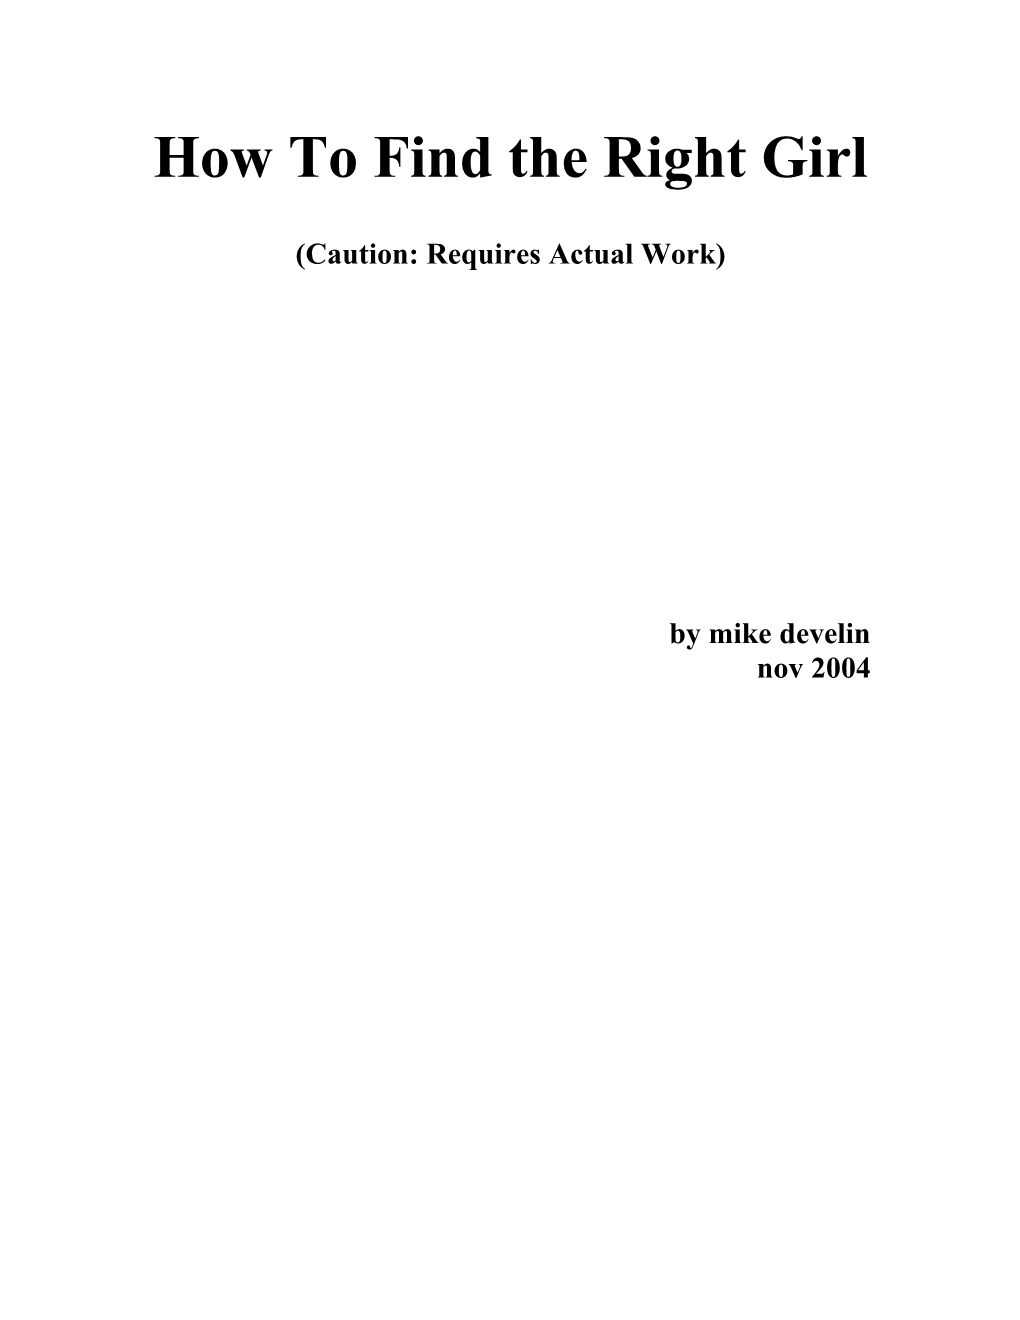 How to Find the Right Girl